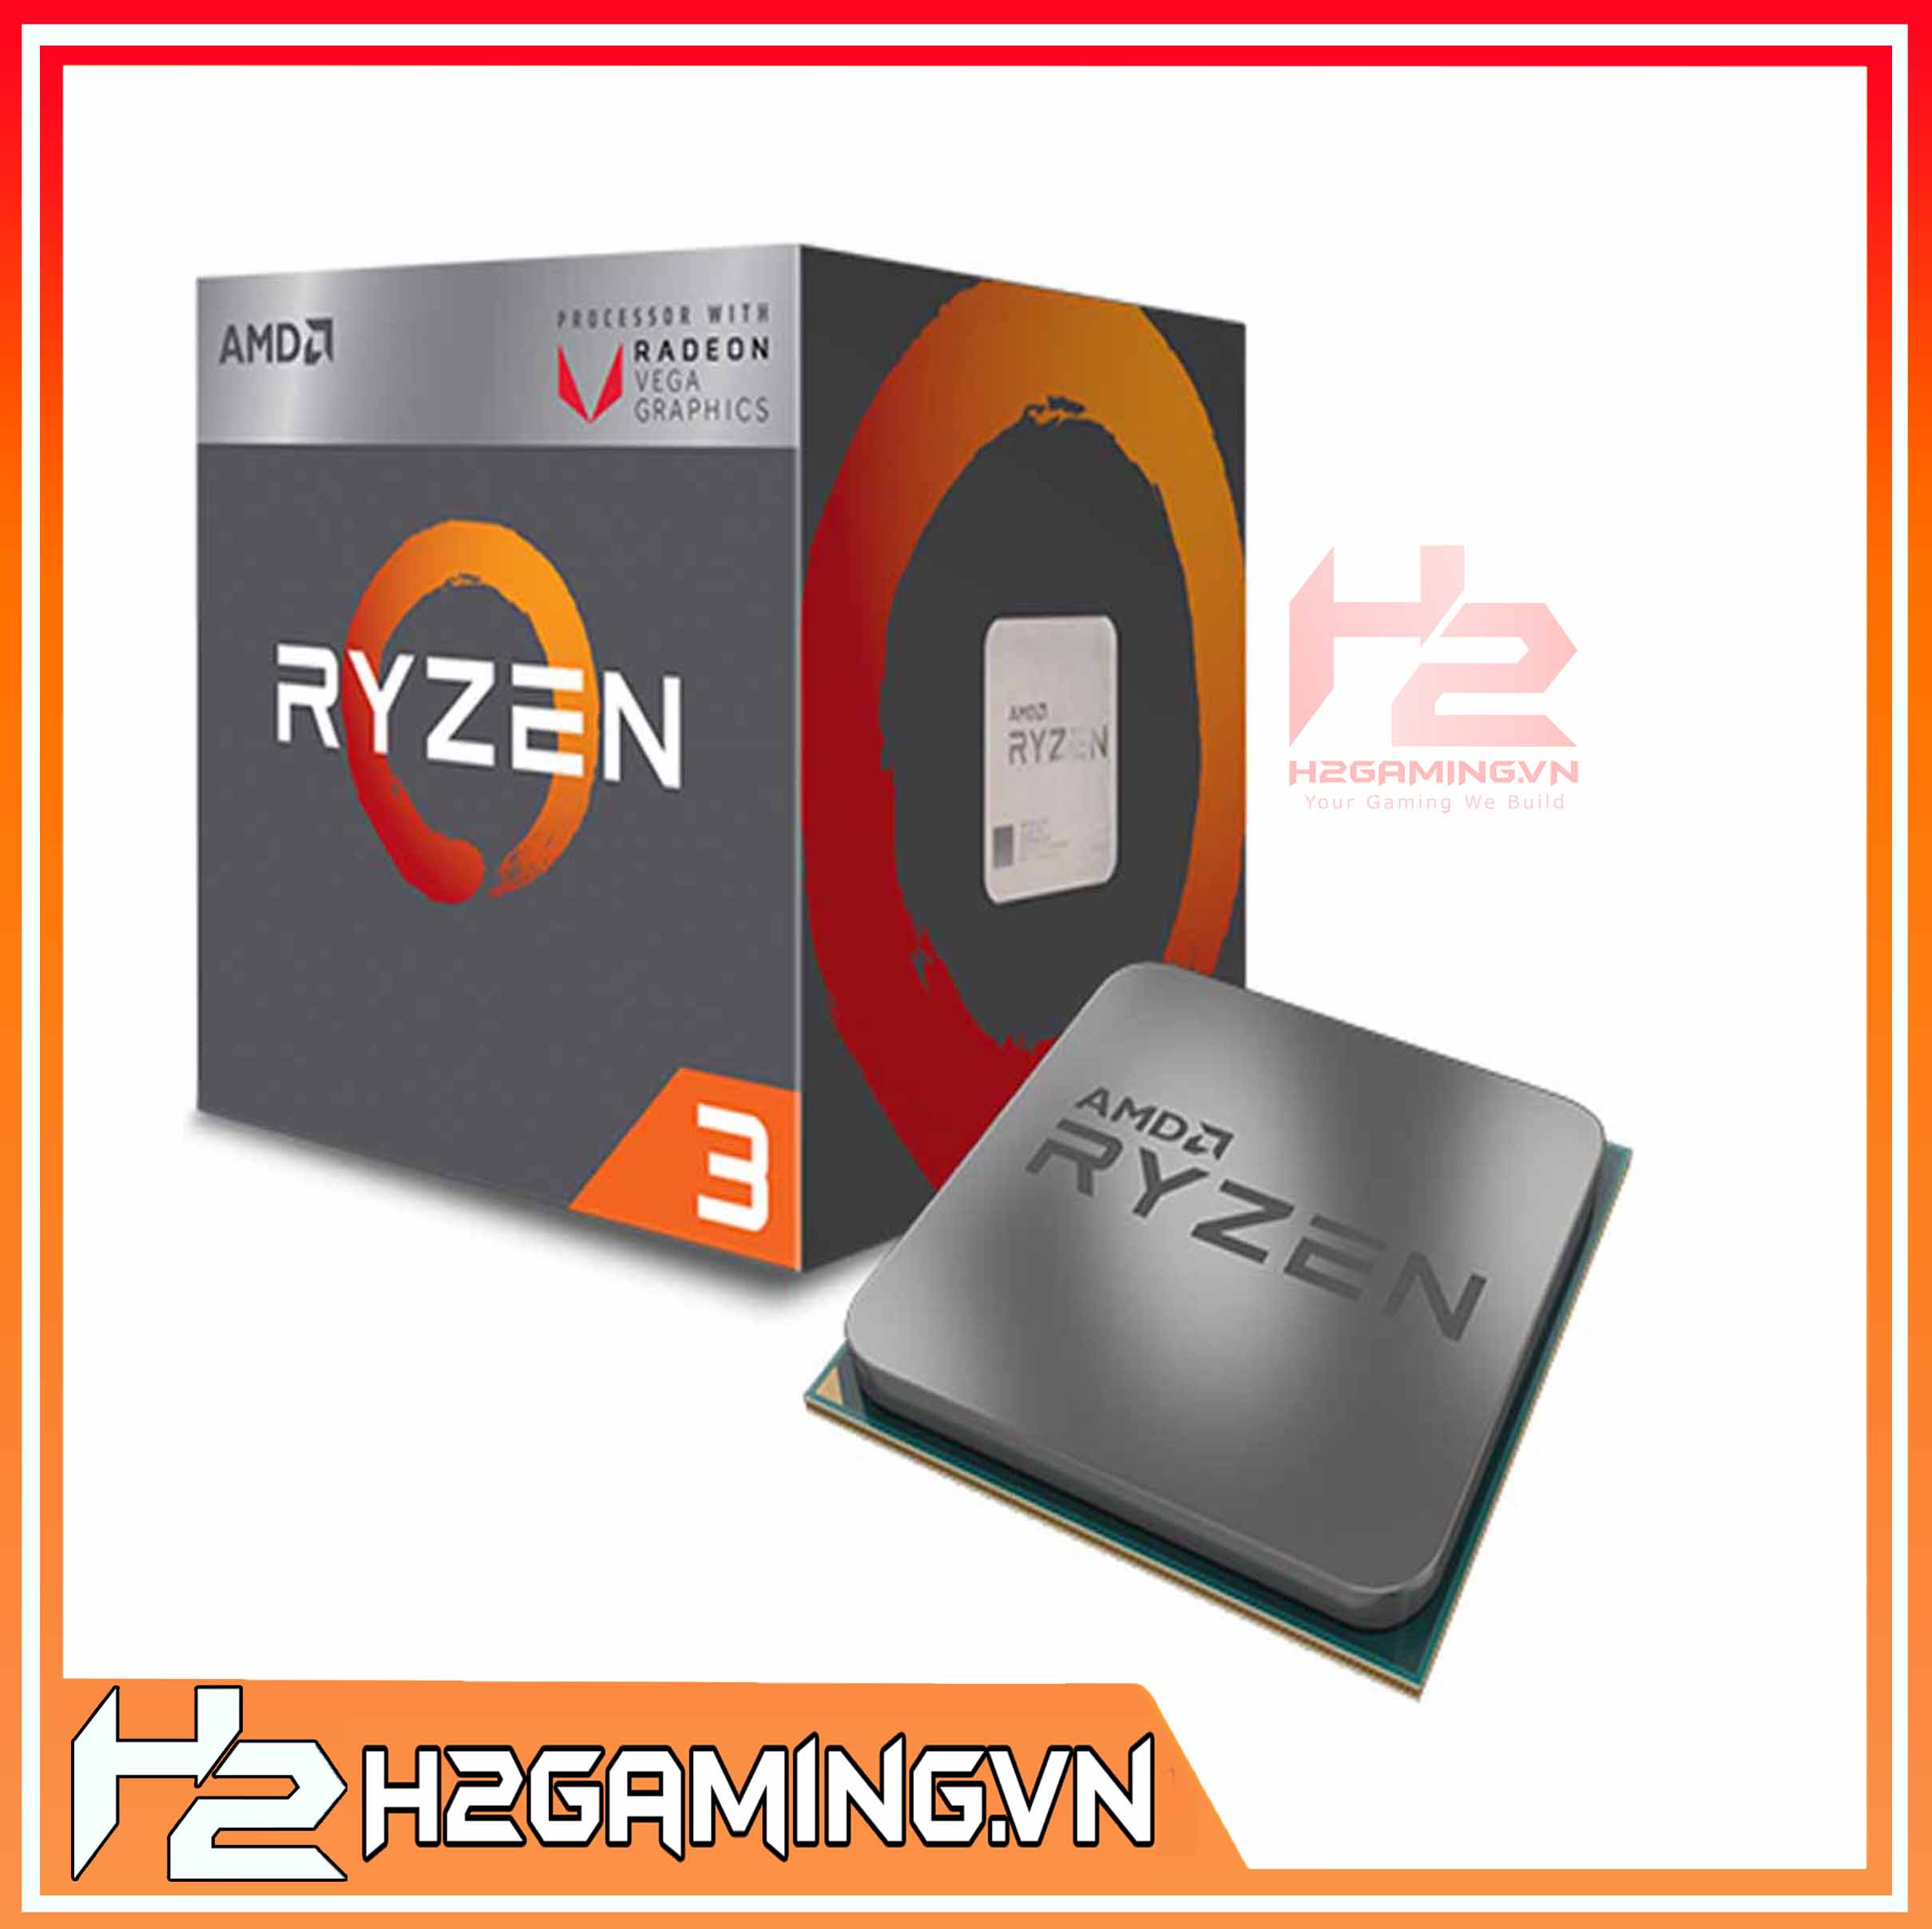 CPU AMD Ryzen 3 2200G 3.5 GHz (3.7 GHz with boost) / 6MB / 4 cores 4